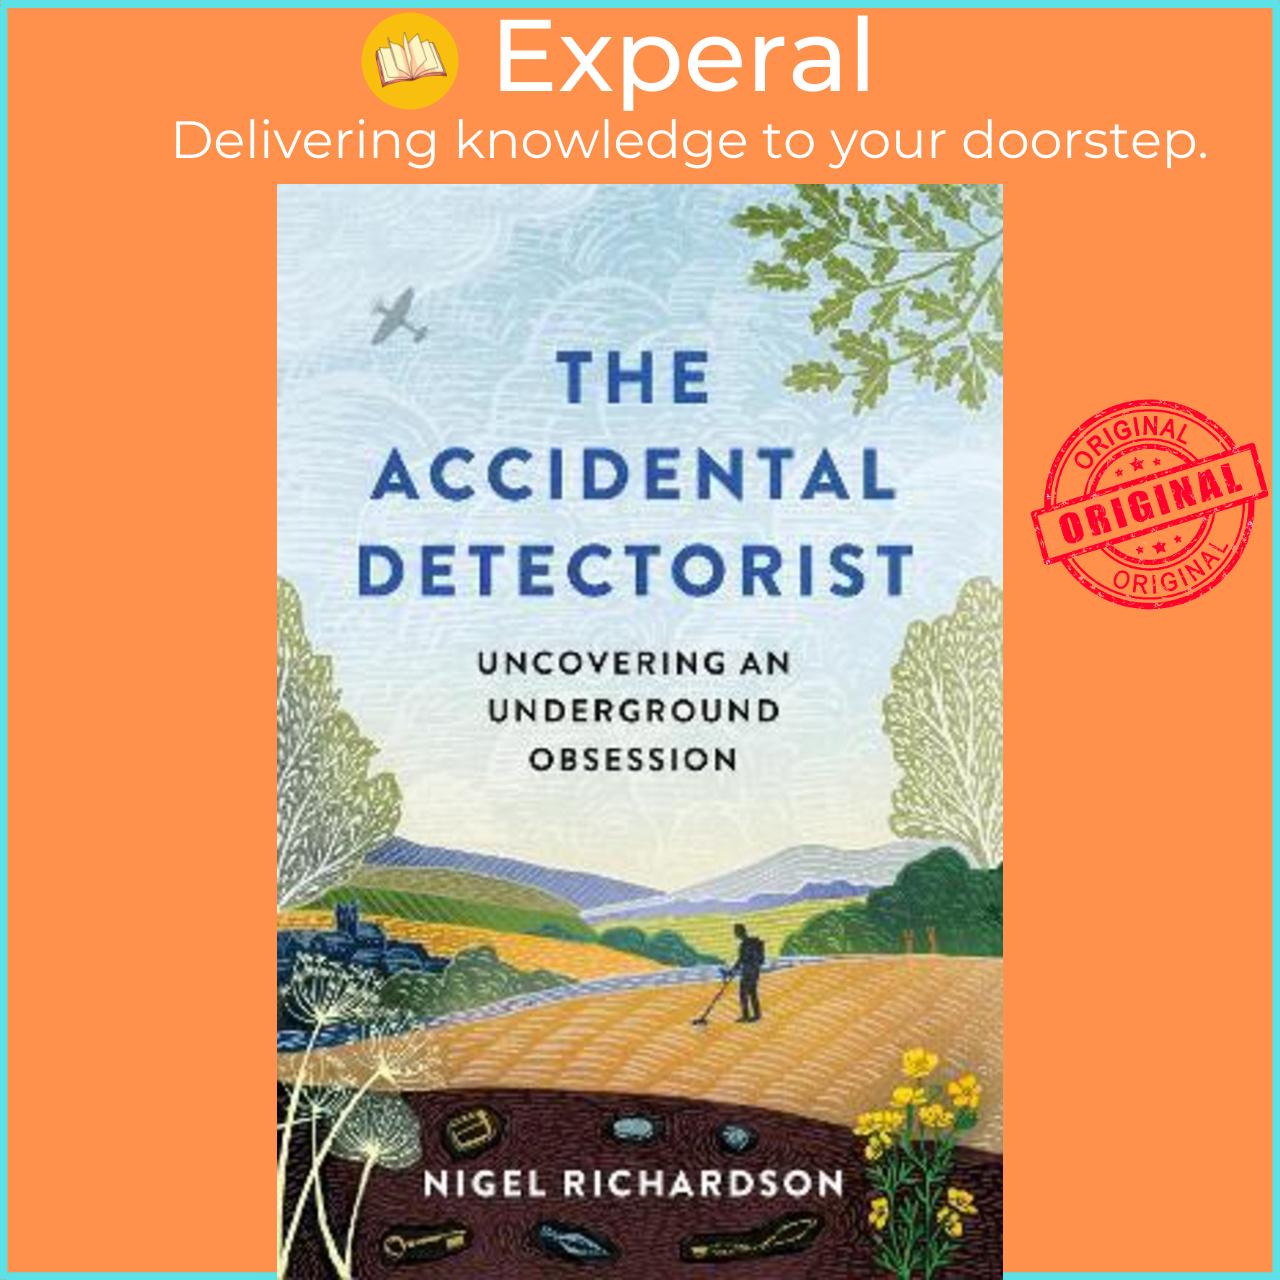 Hình ảnh Sách - The Accidental Detectorist : Uncovering an Underground Obsession by Nigel Richardson (UK edition, hardcover)